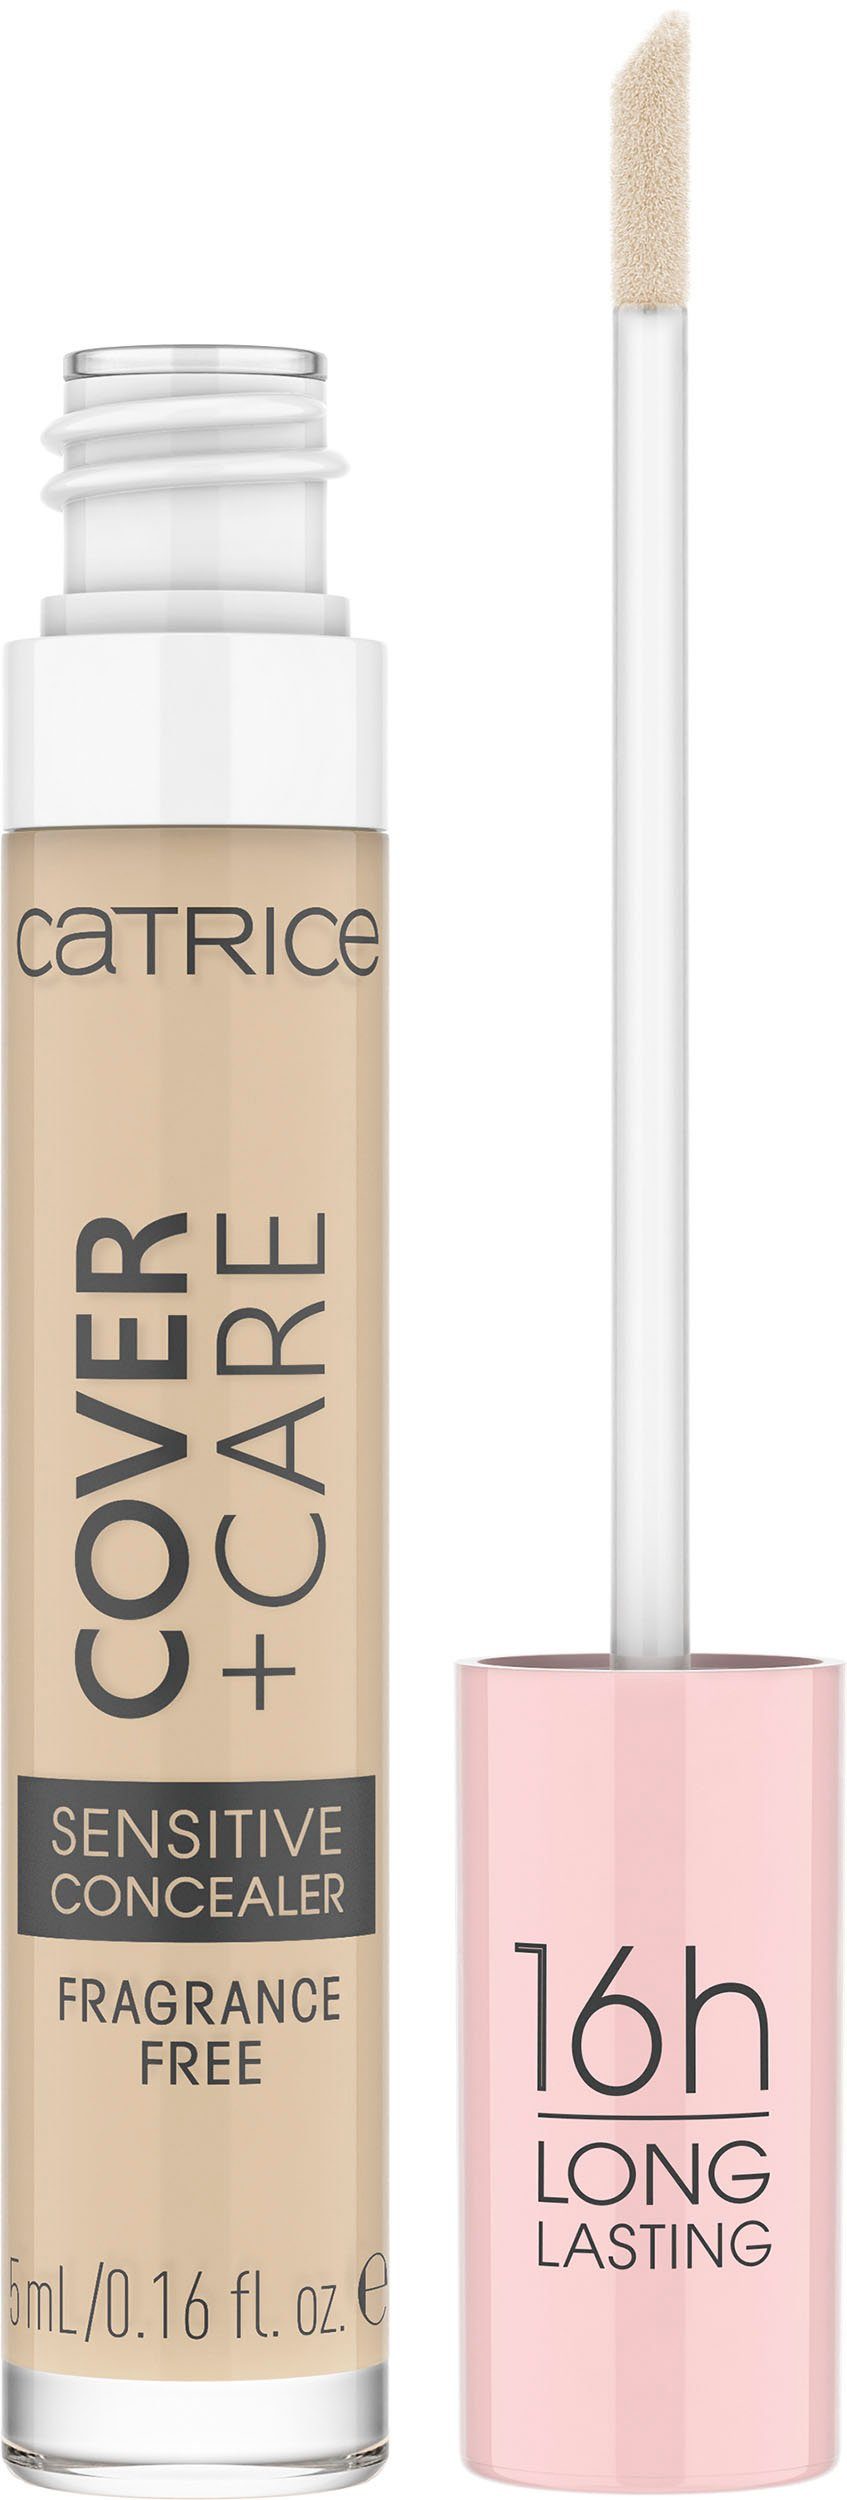 Catrice Concealer Catrice 3-tlg. 010C + Sensitive nude Care Concealer, Cover